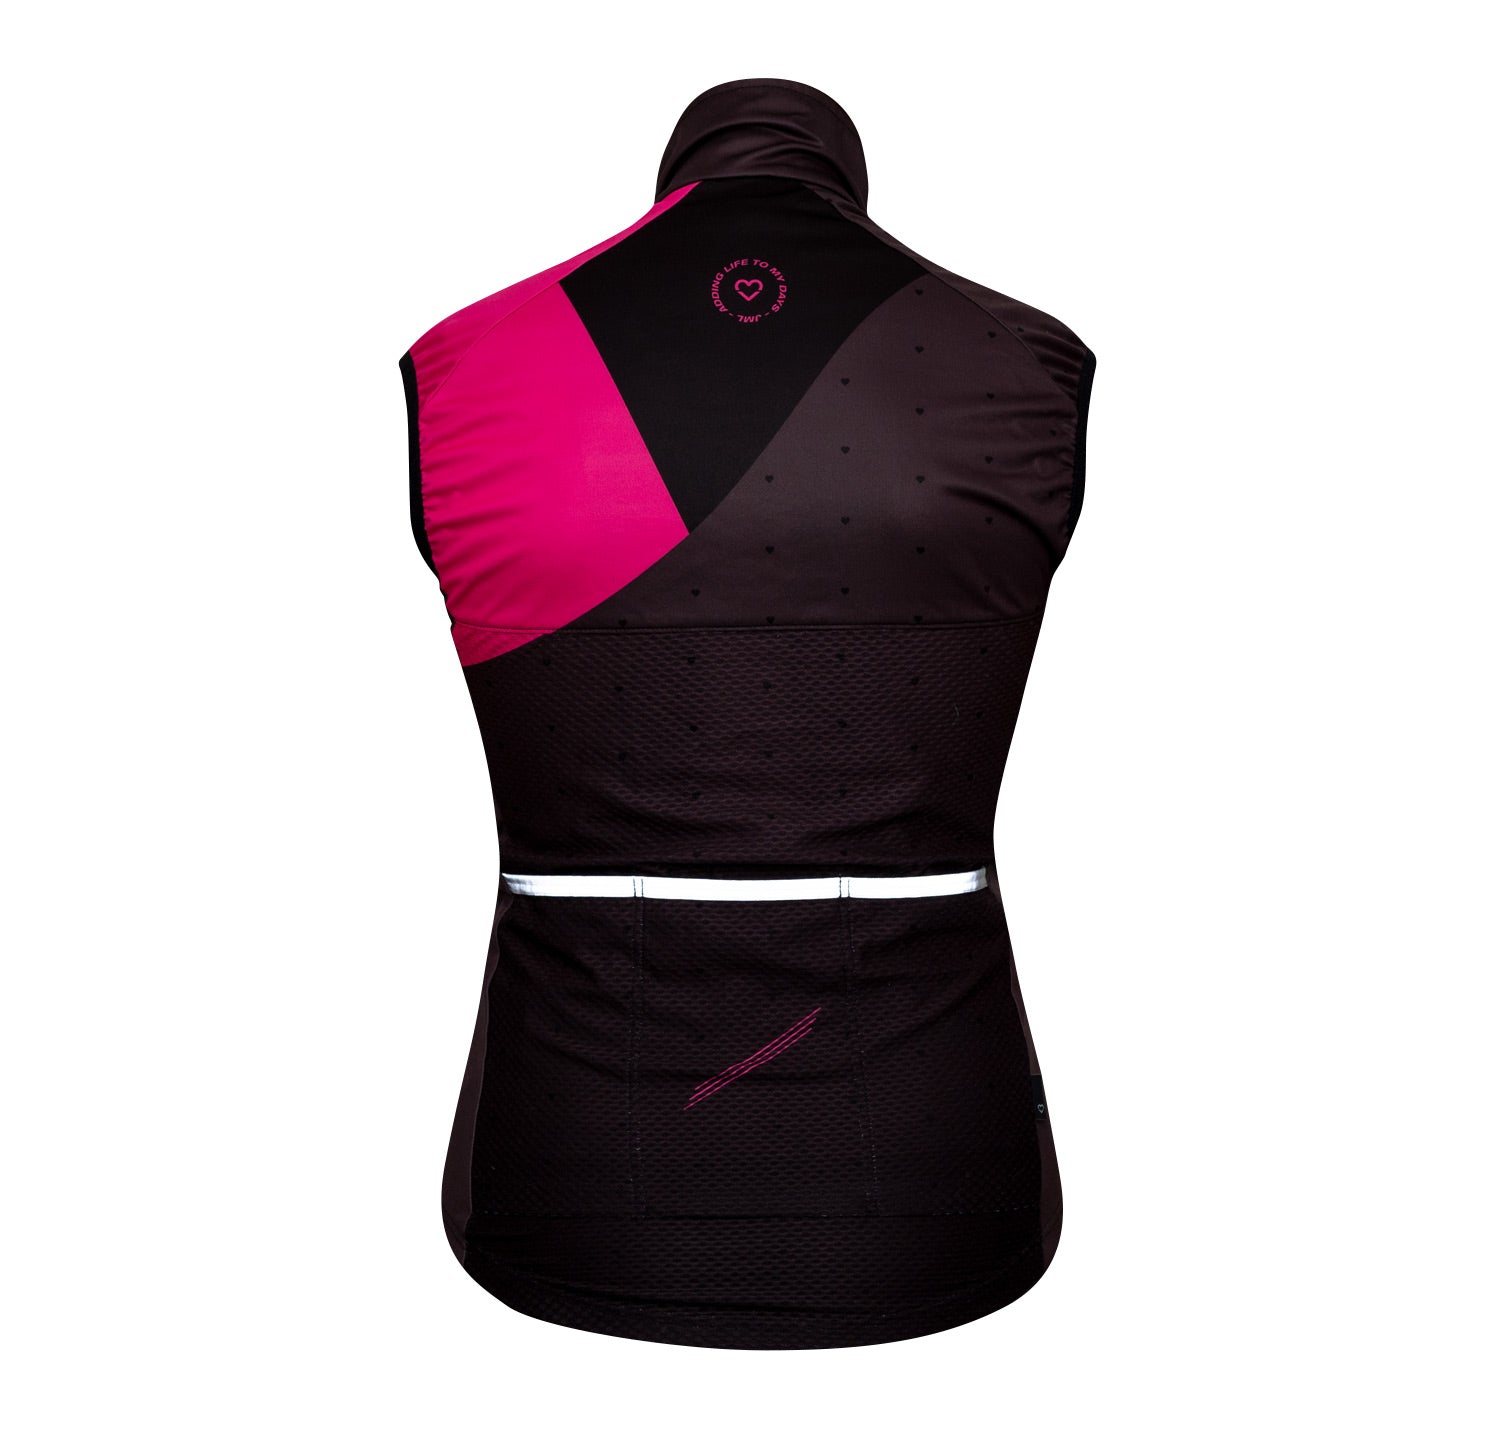 JML Triangle Vest W freeshipping - Jerseys Made with Love